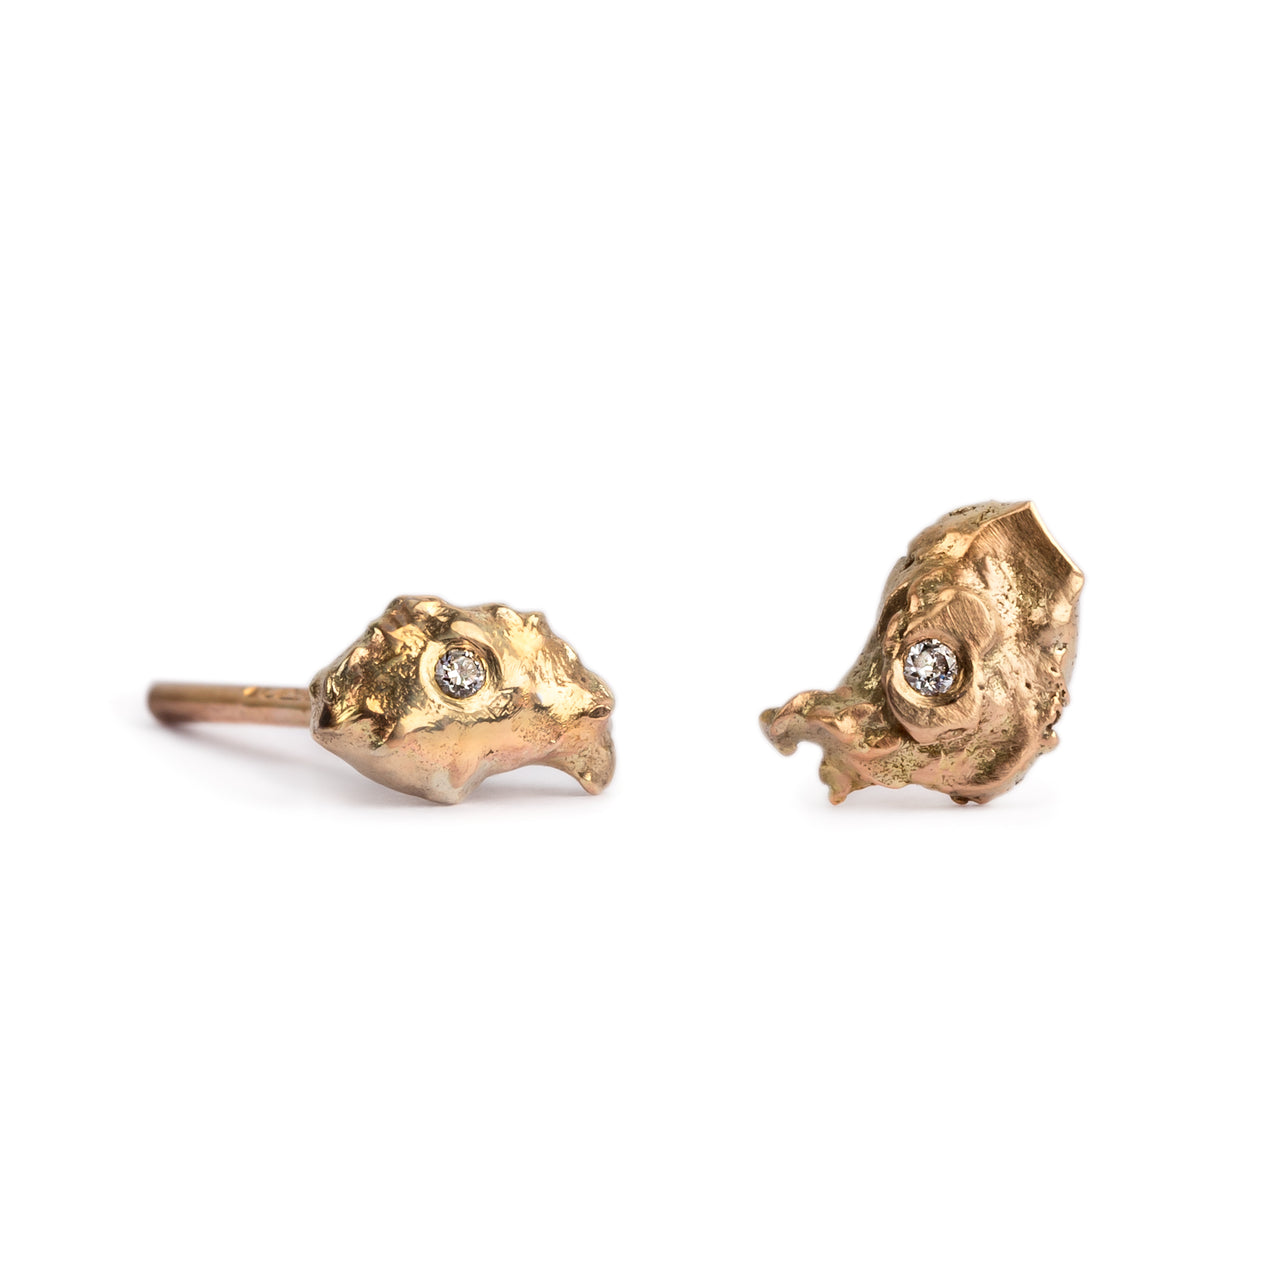 Gold and Diamonds nugget studs